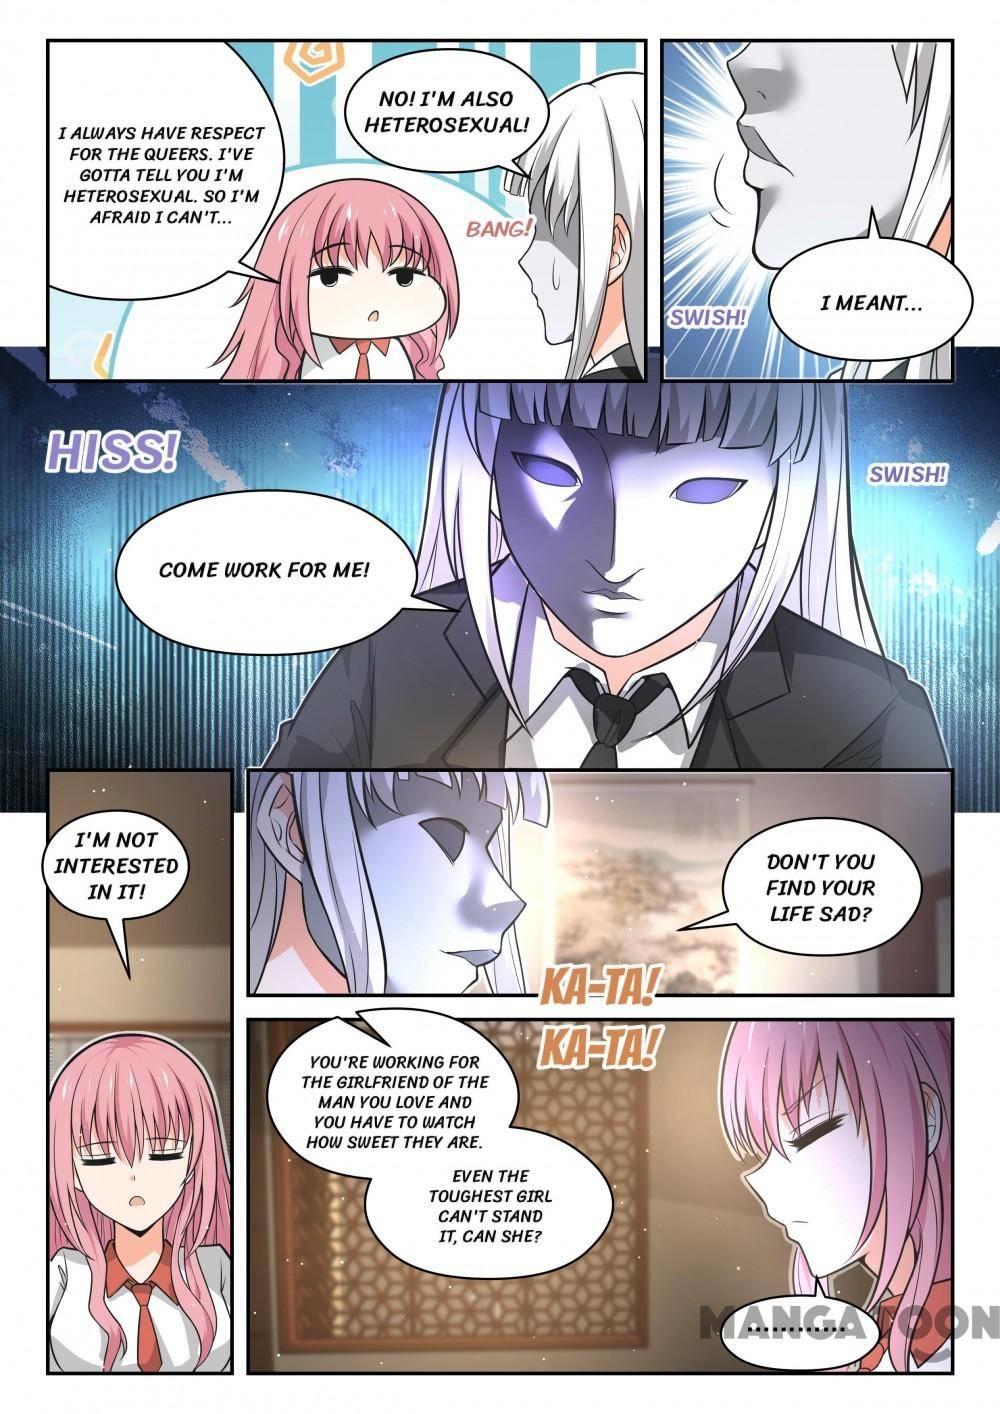 The Boy In The All-Girls School Chapter 472 page 3 - Mangakakalot